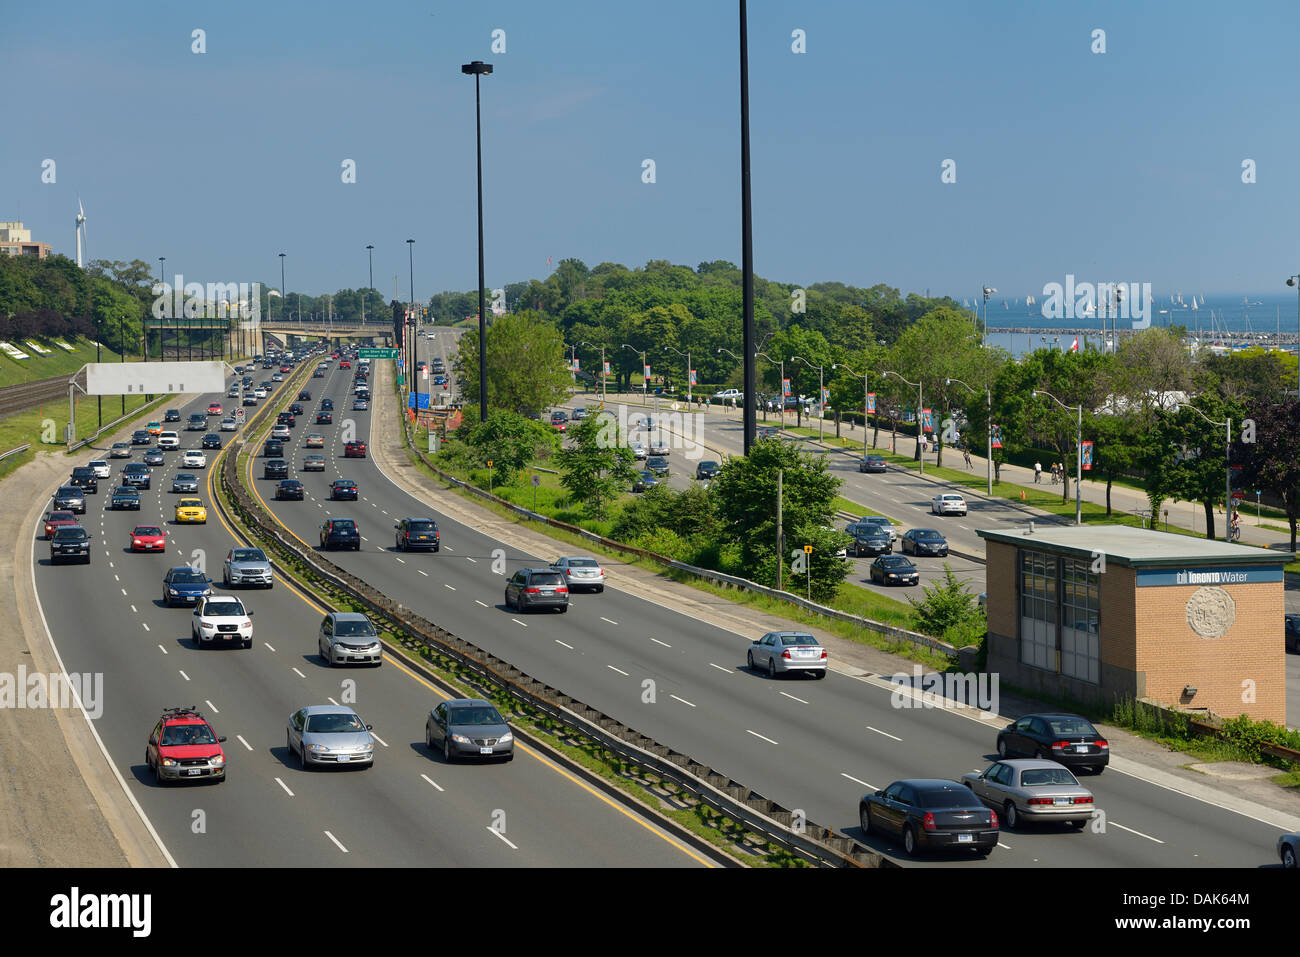 Toronto Sunday traffic on the Gardiner Expressway with tall ships in the Harbour Stock Photo